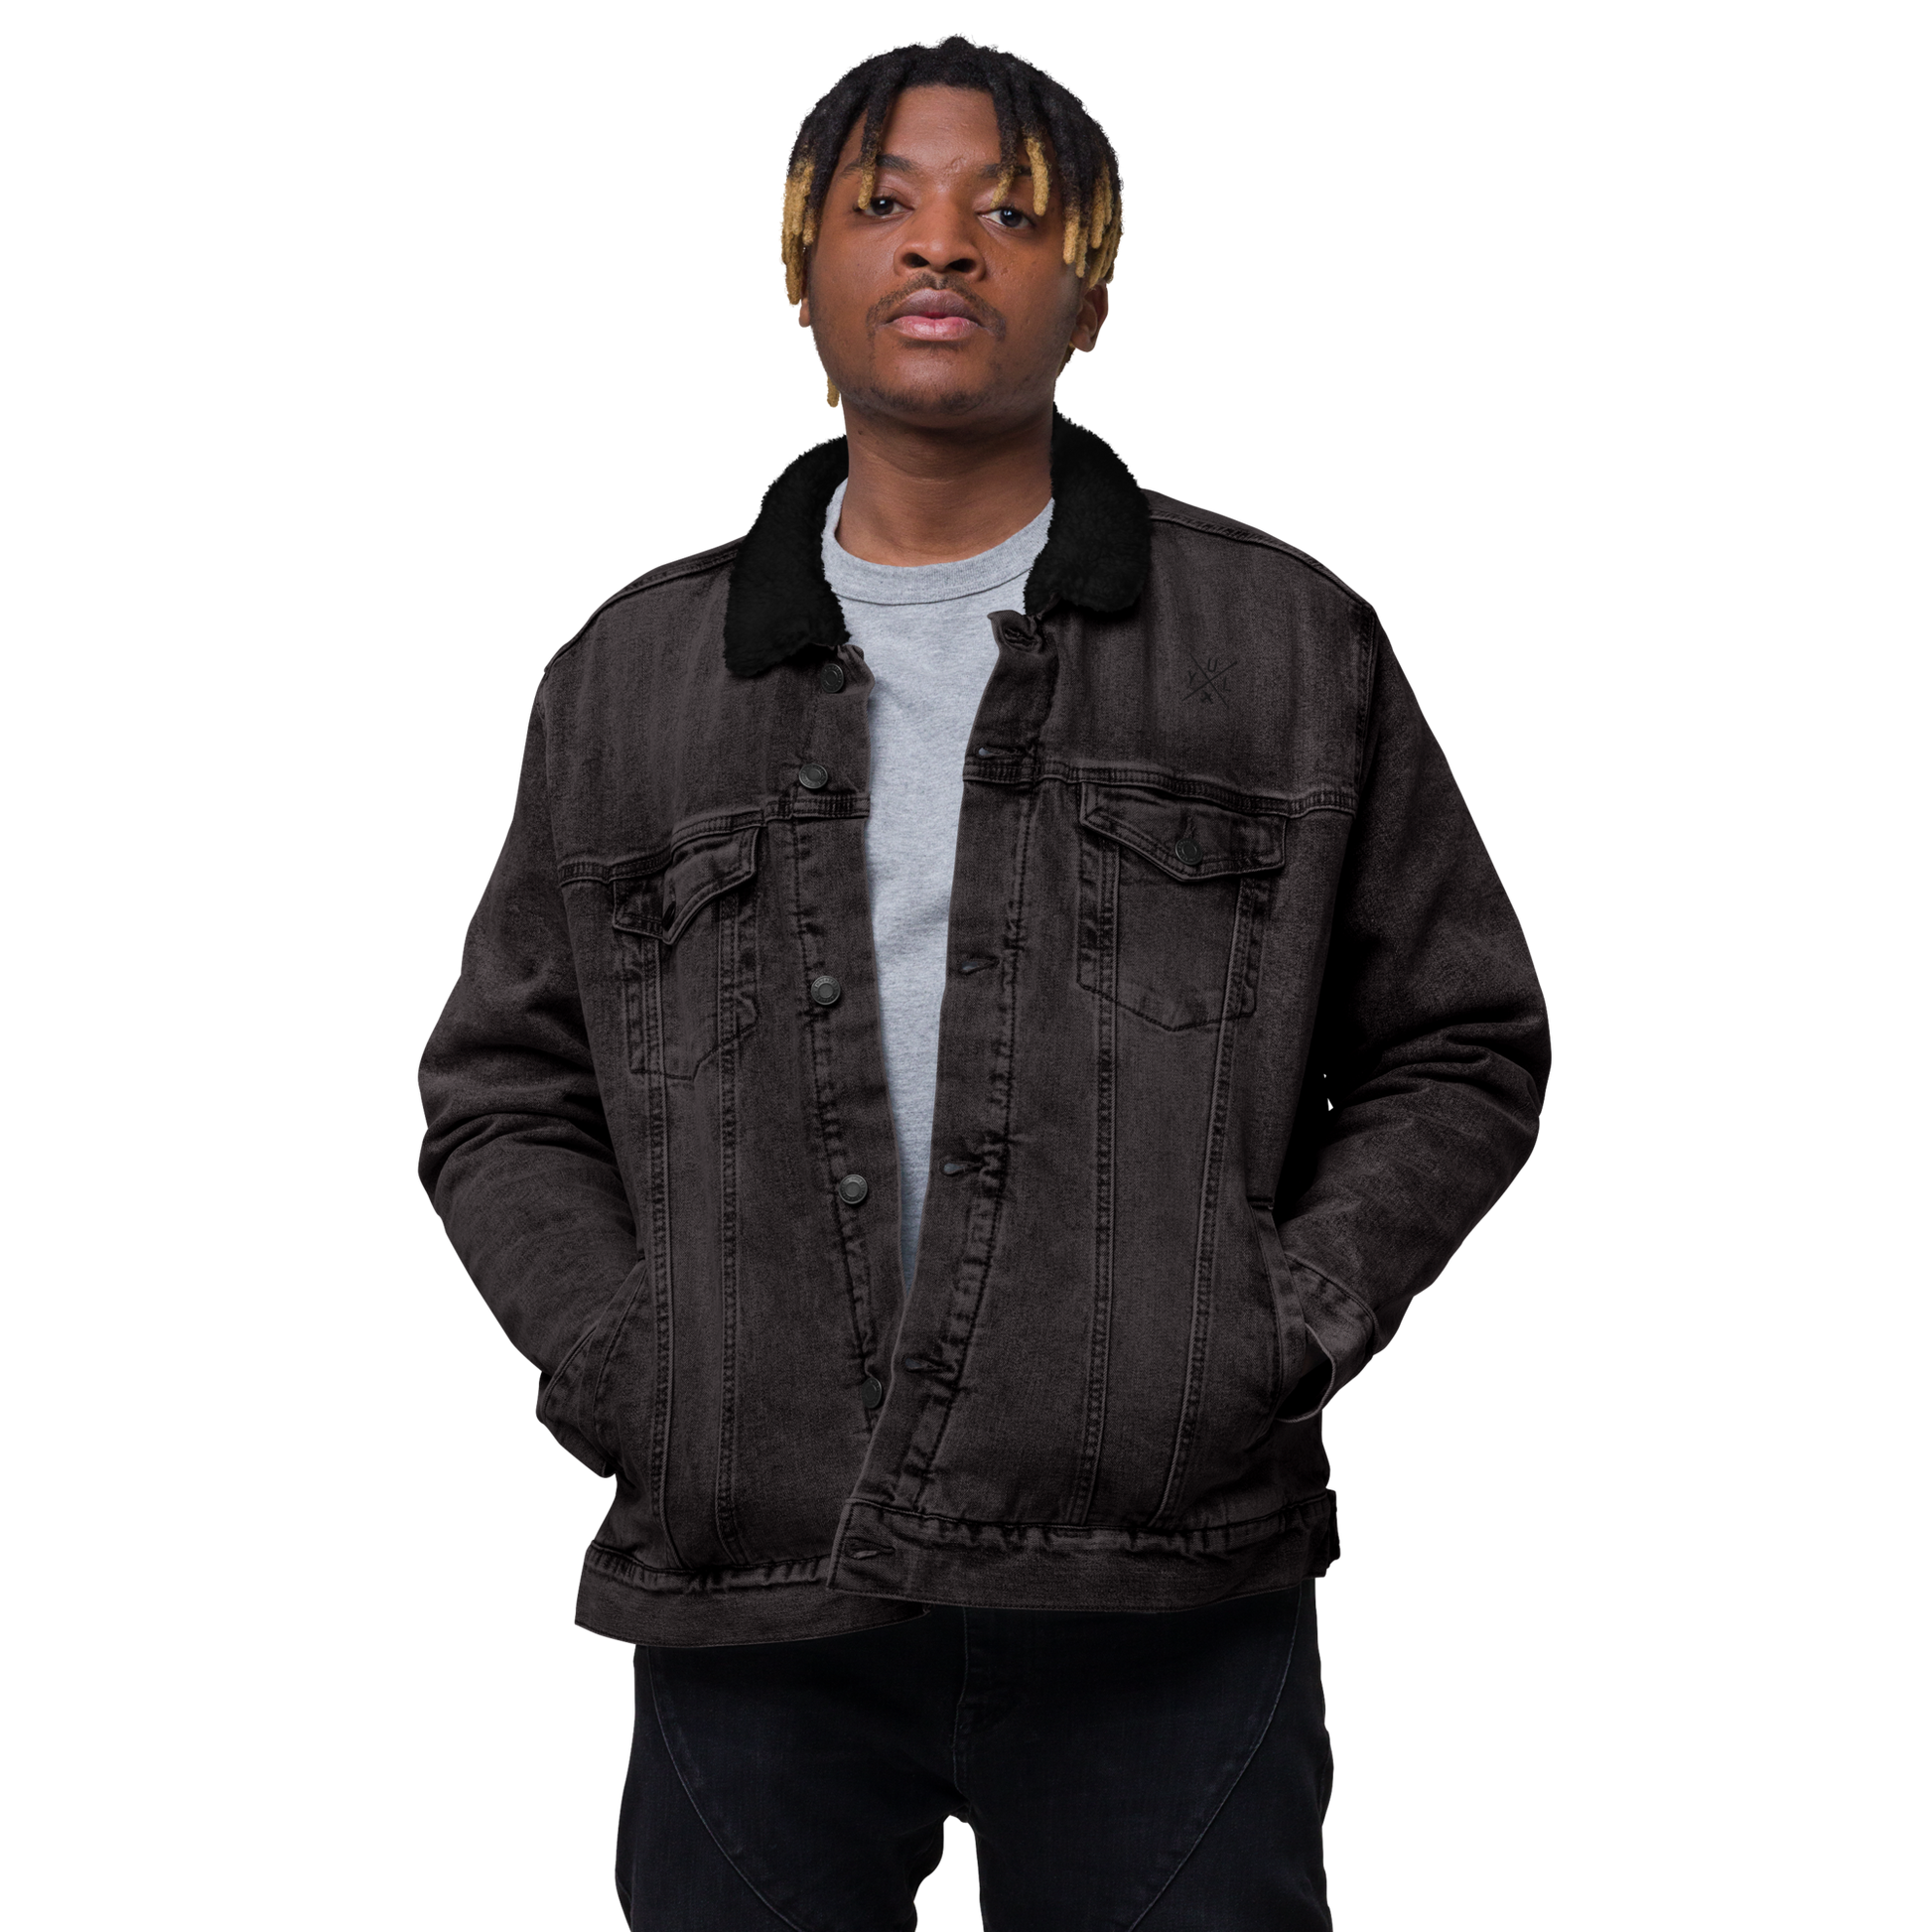 YHM Designs - YUL Montreal Denim Sherpa Jacket - Crossed-X Design with Airport Code and Vintage Propliner - Black & White Embroidery - Image 01